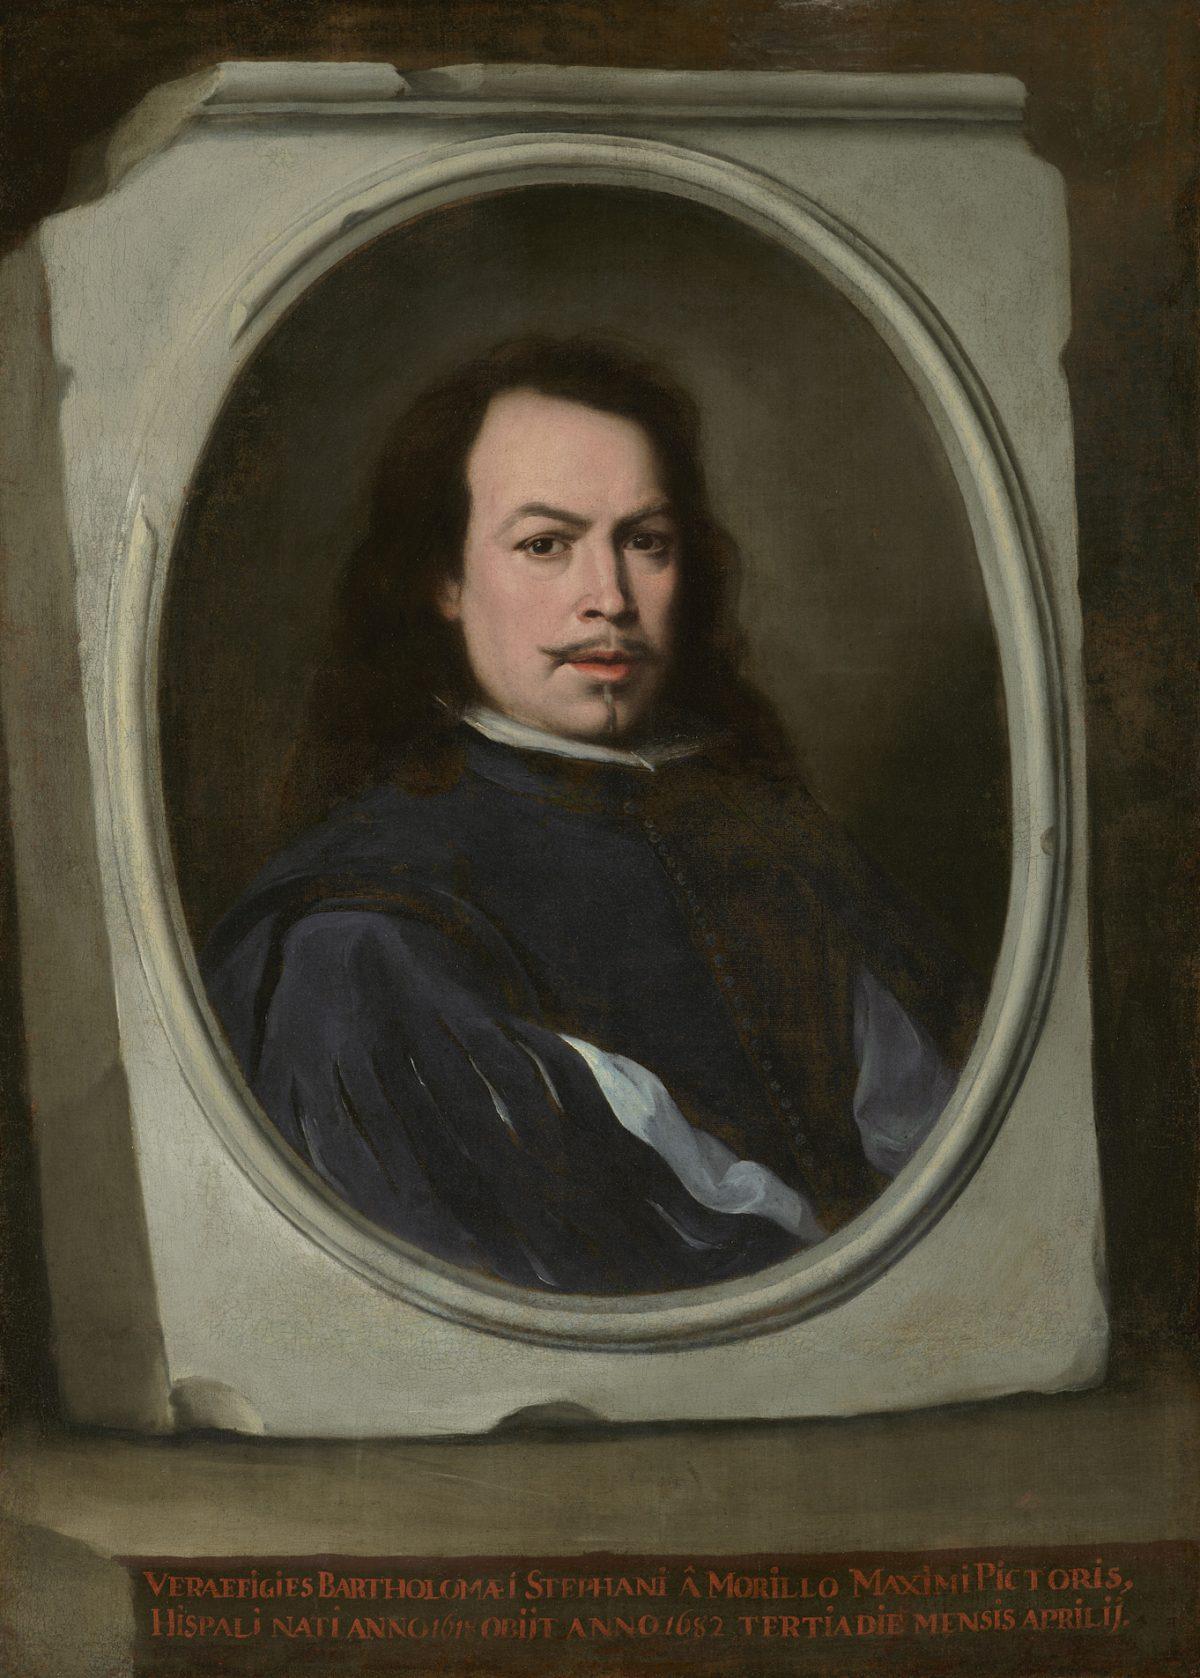 Self-Portrait, circa 1650−55, by Bartolomé Esteban Murillo. Oil on canvas, 42 1/8 inches by 30 1/2 inches. Gift of Dr. and Mrs. Henry Clay Frick II, 2014. (The Frick Collection)